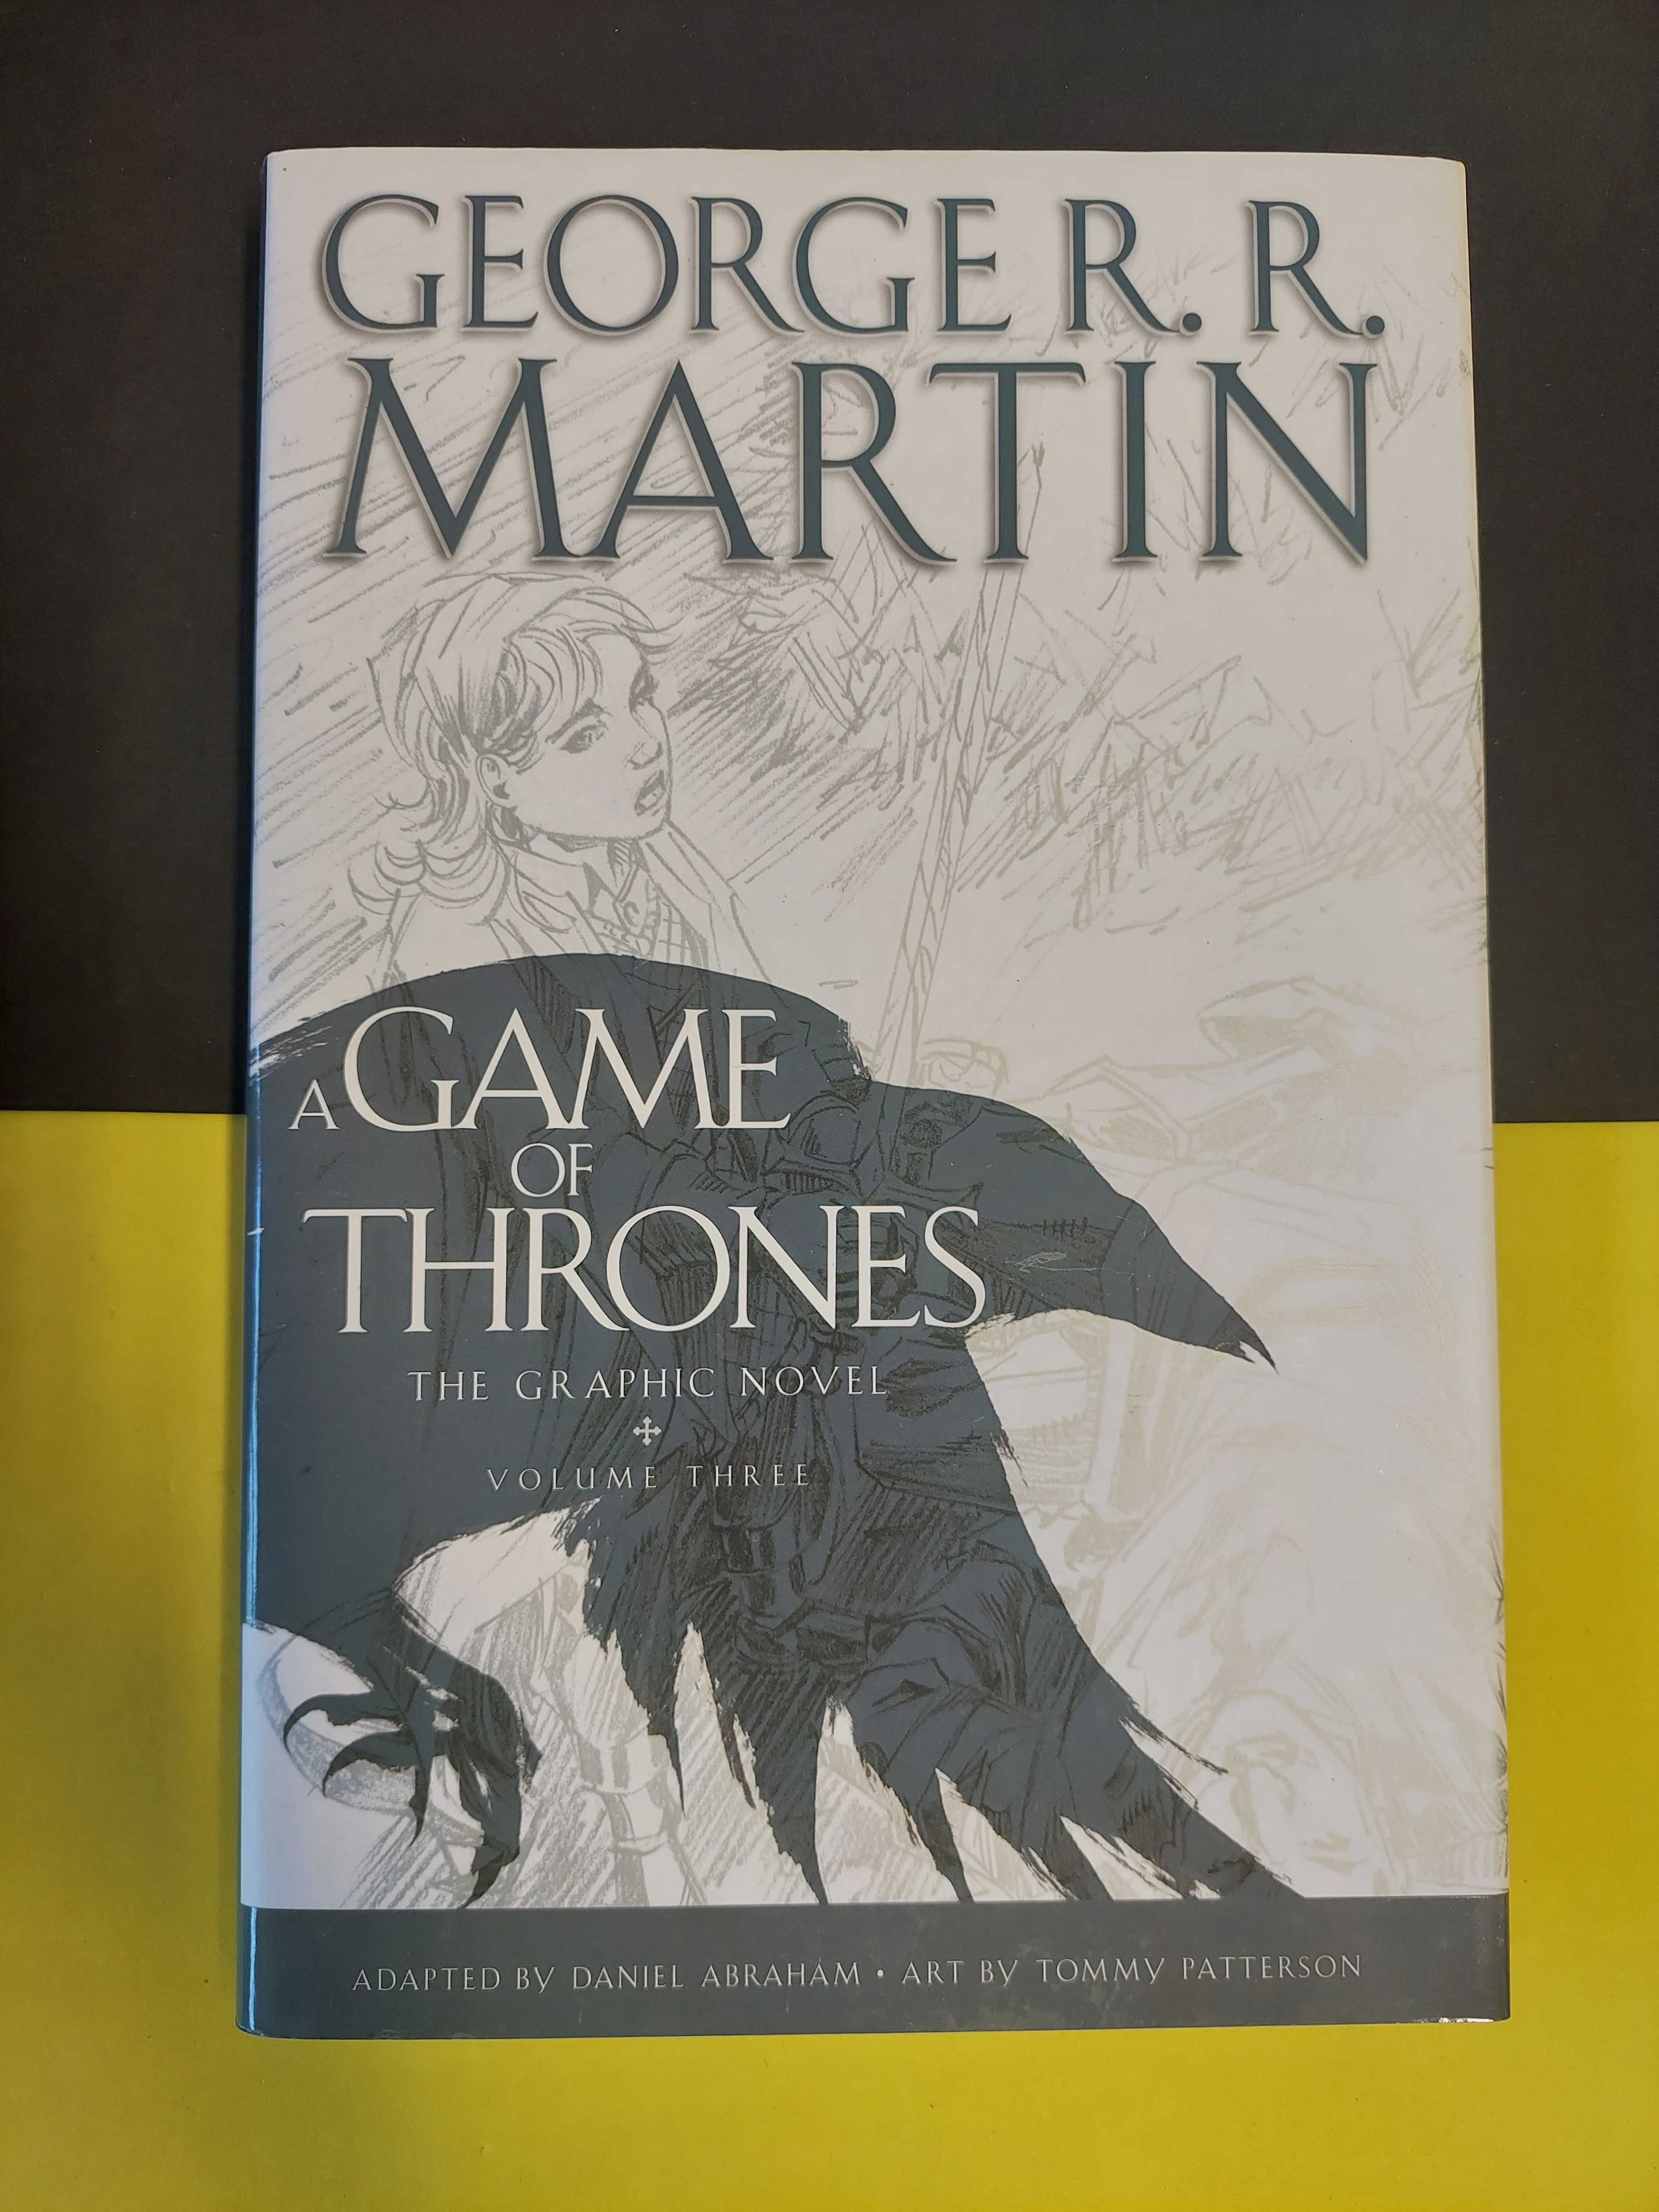 George R. R. Martin - A game of thrones: The graphic novel, 3º volume